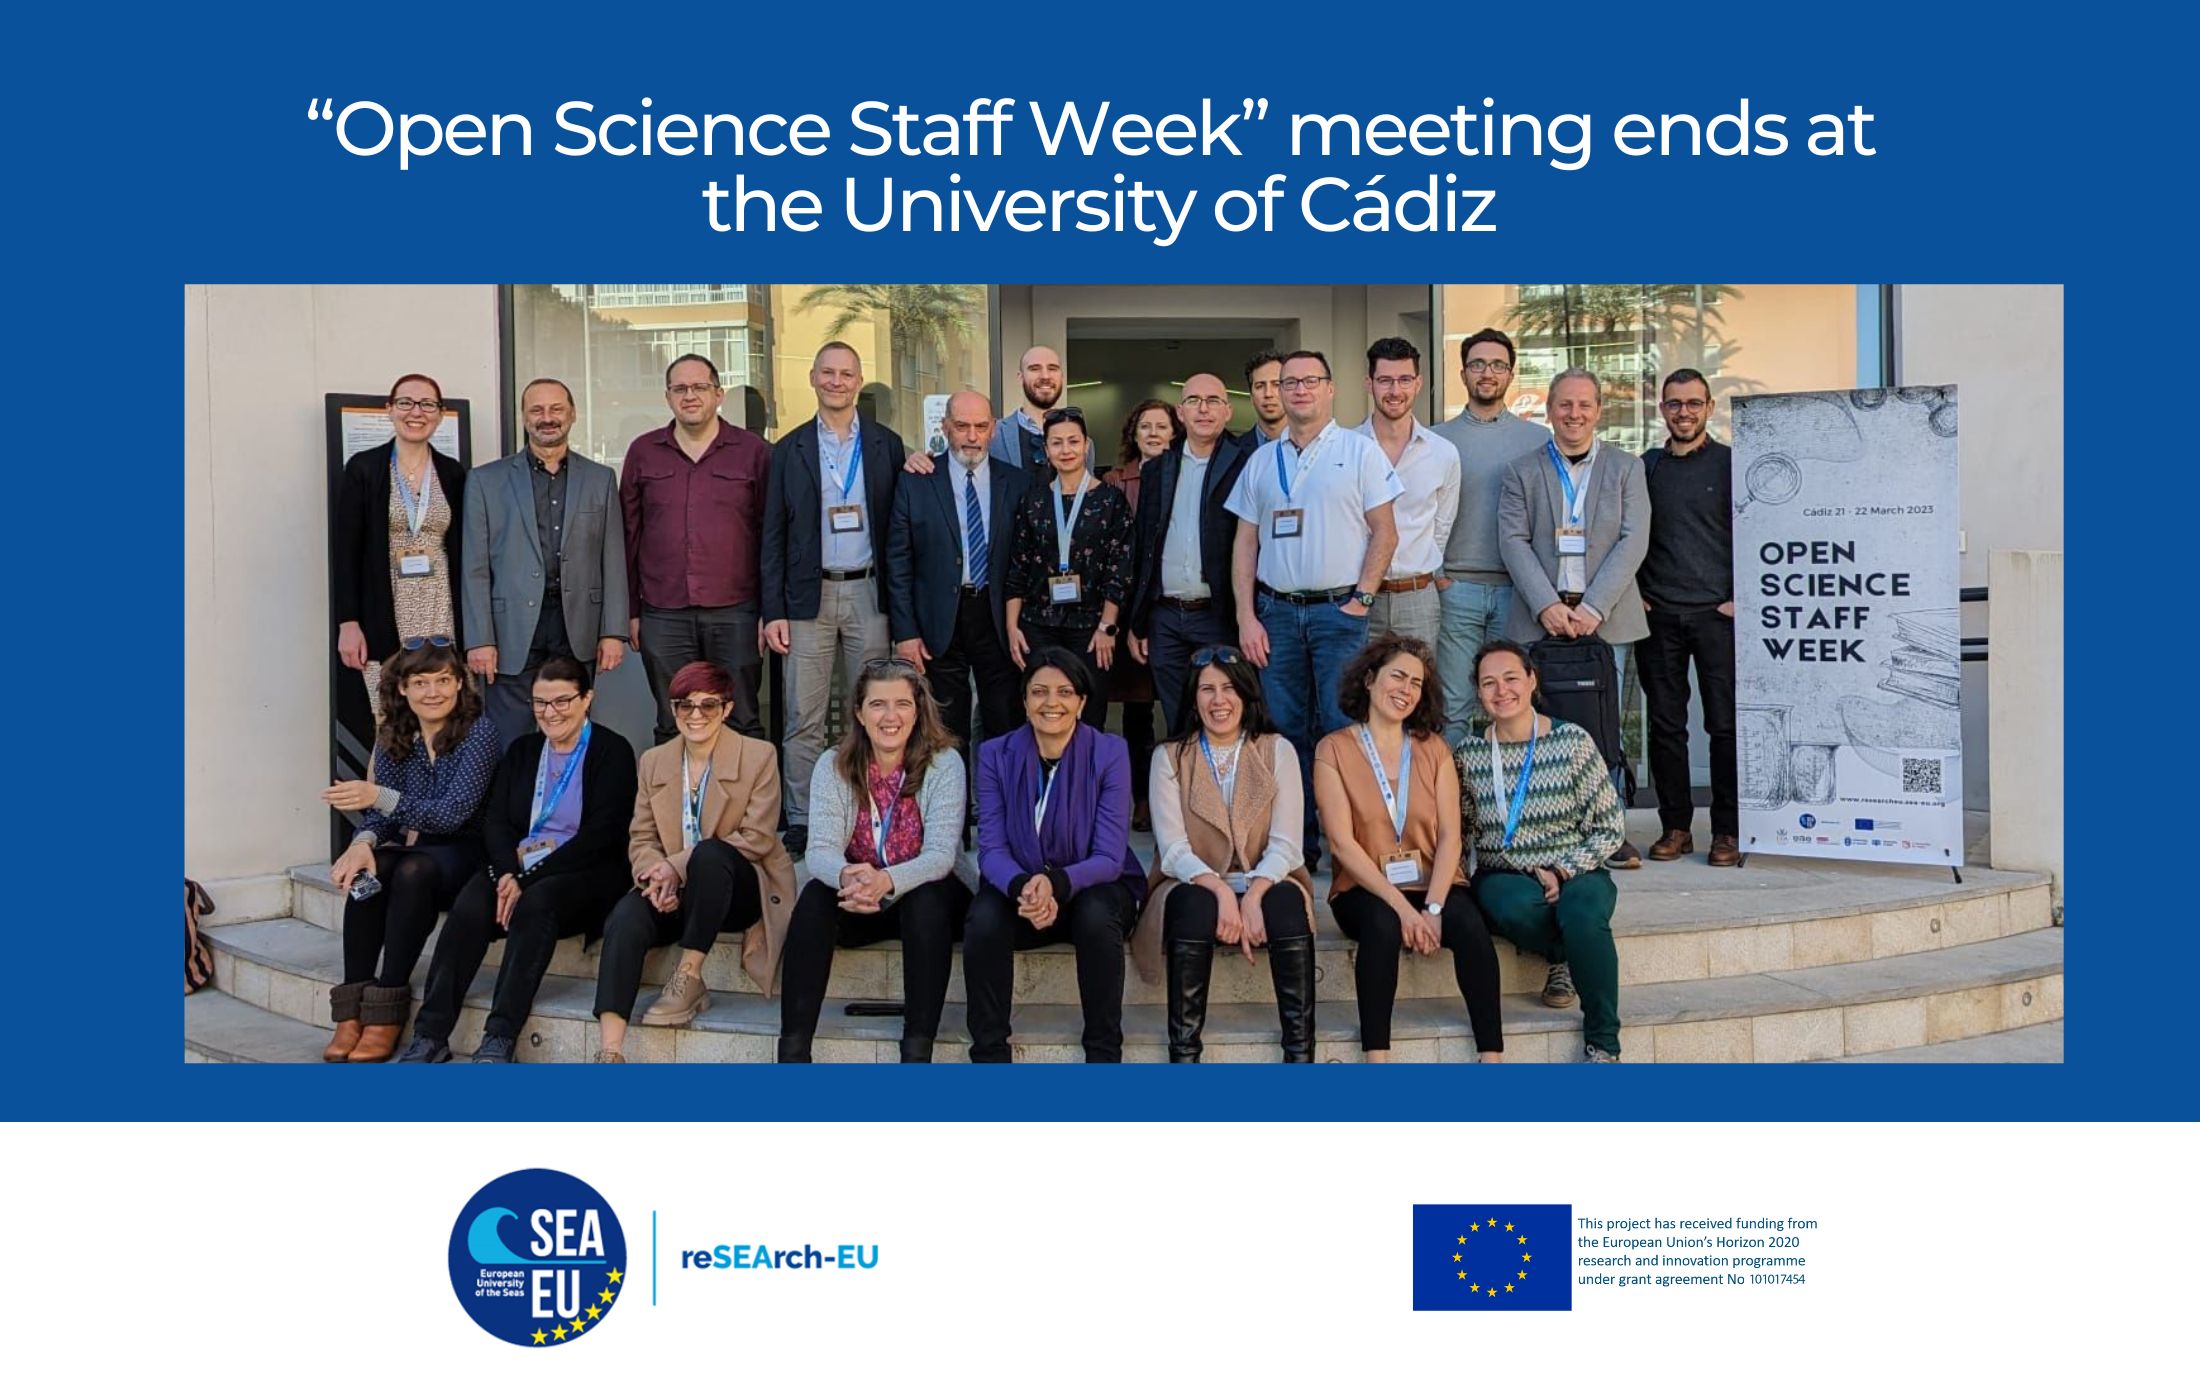 “Open Science Staff Week” meeting ends at the University of Cádiz